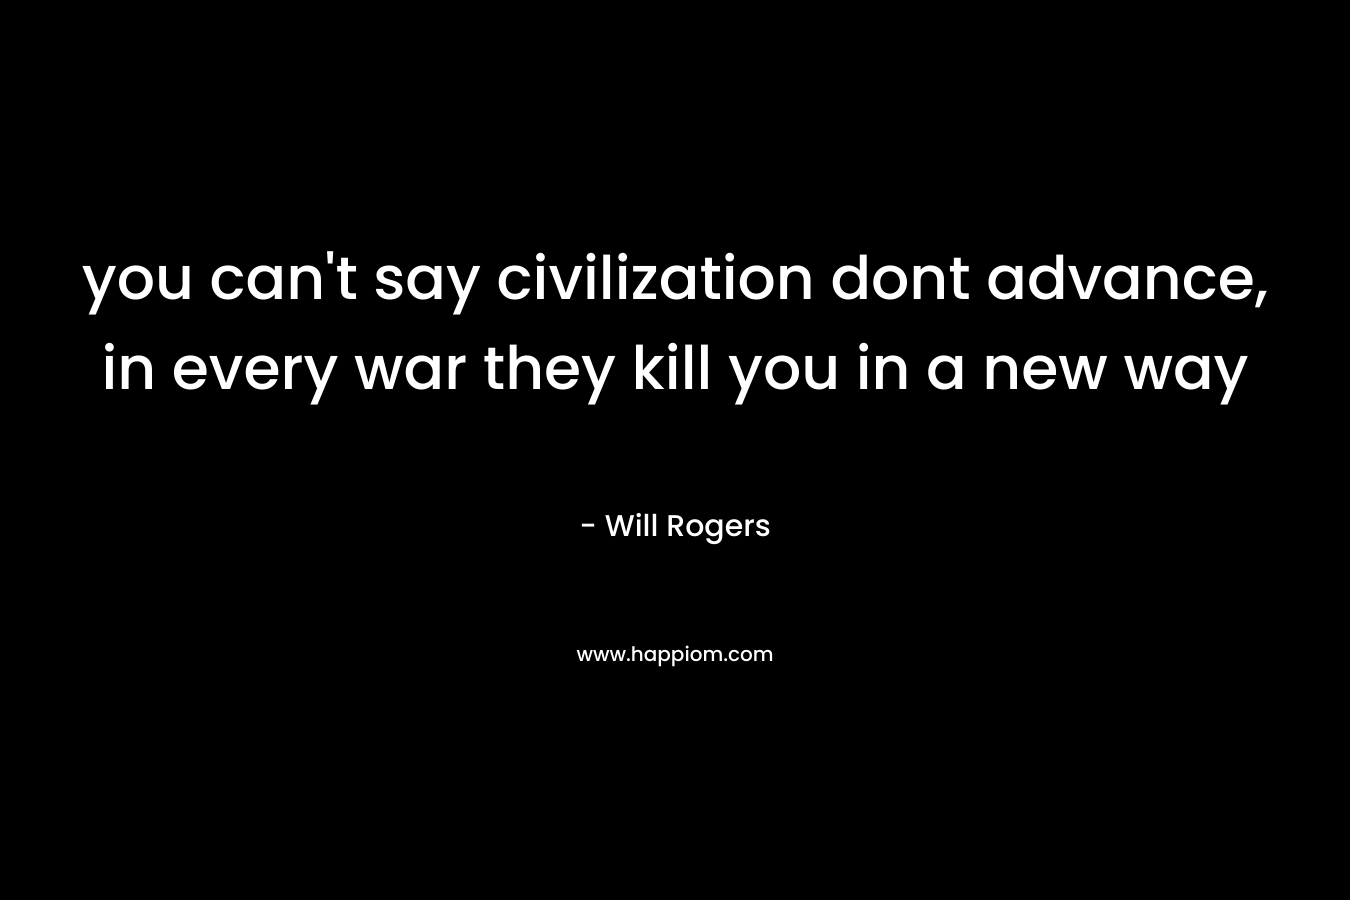 you can't say civilization dont advance, in every war they kill you in a new way